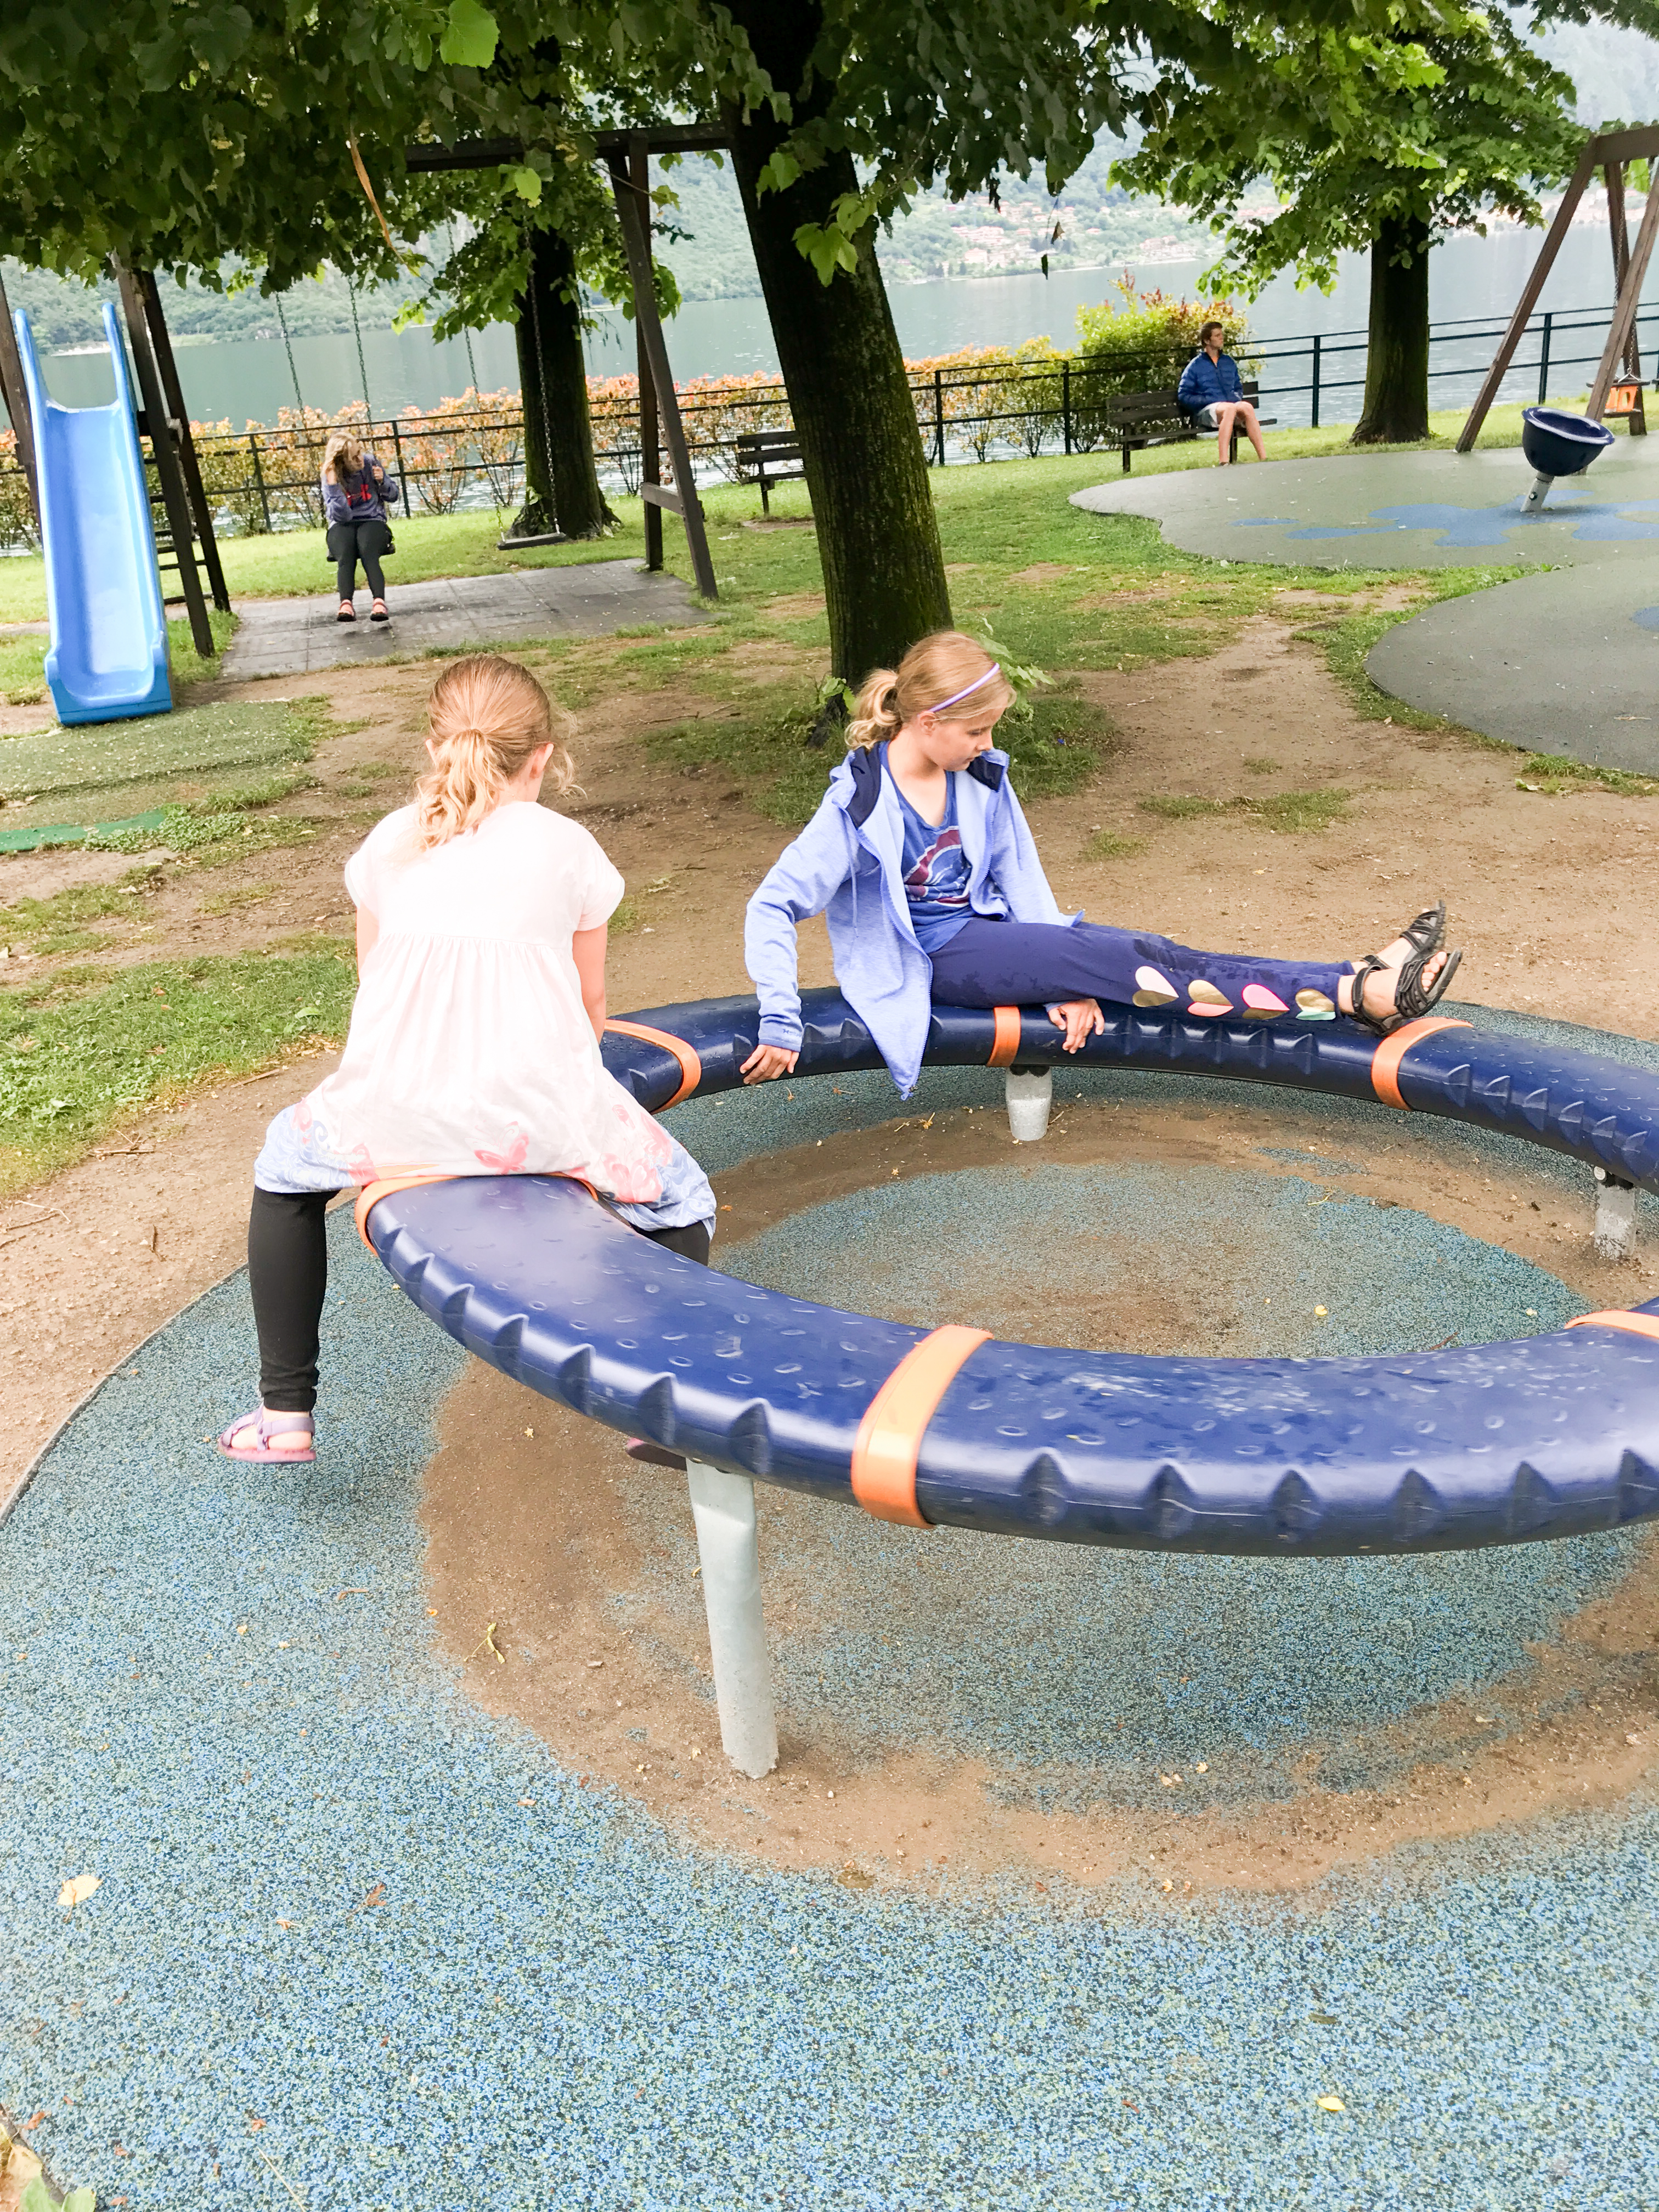 Playgrounds in Europe